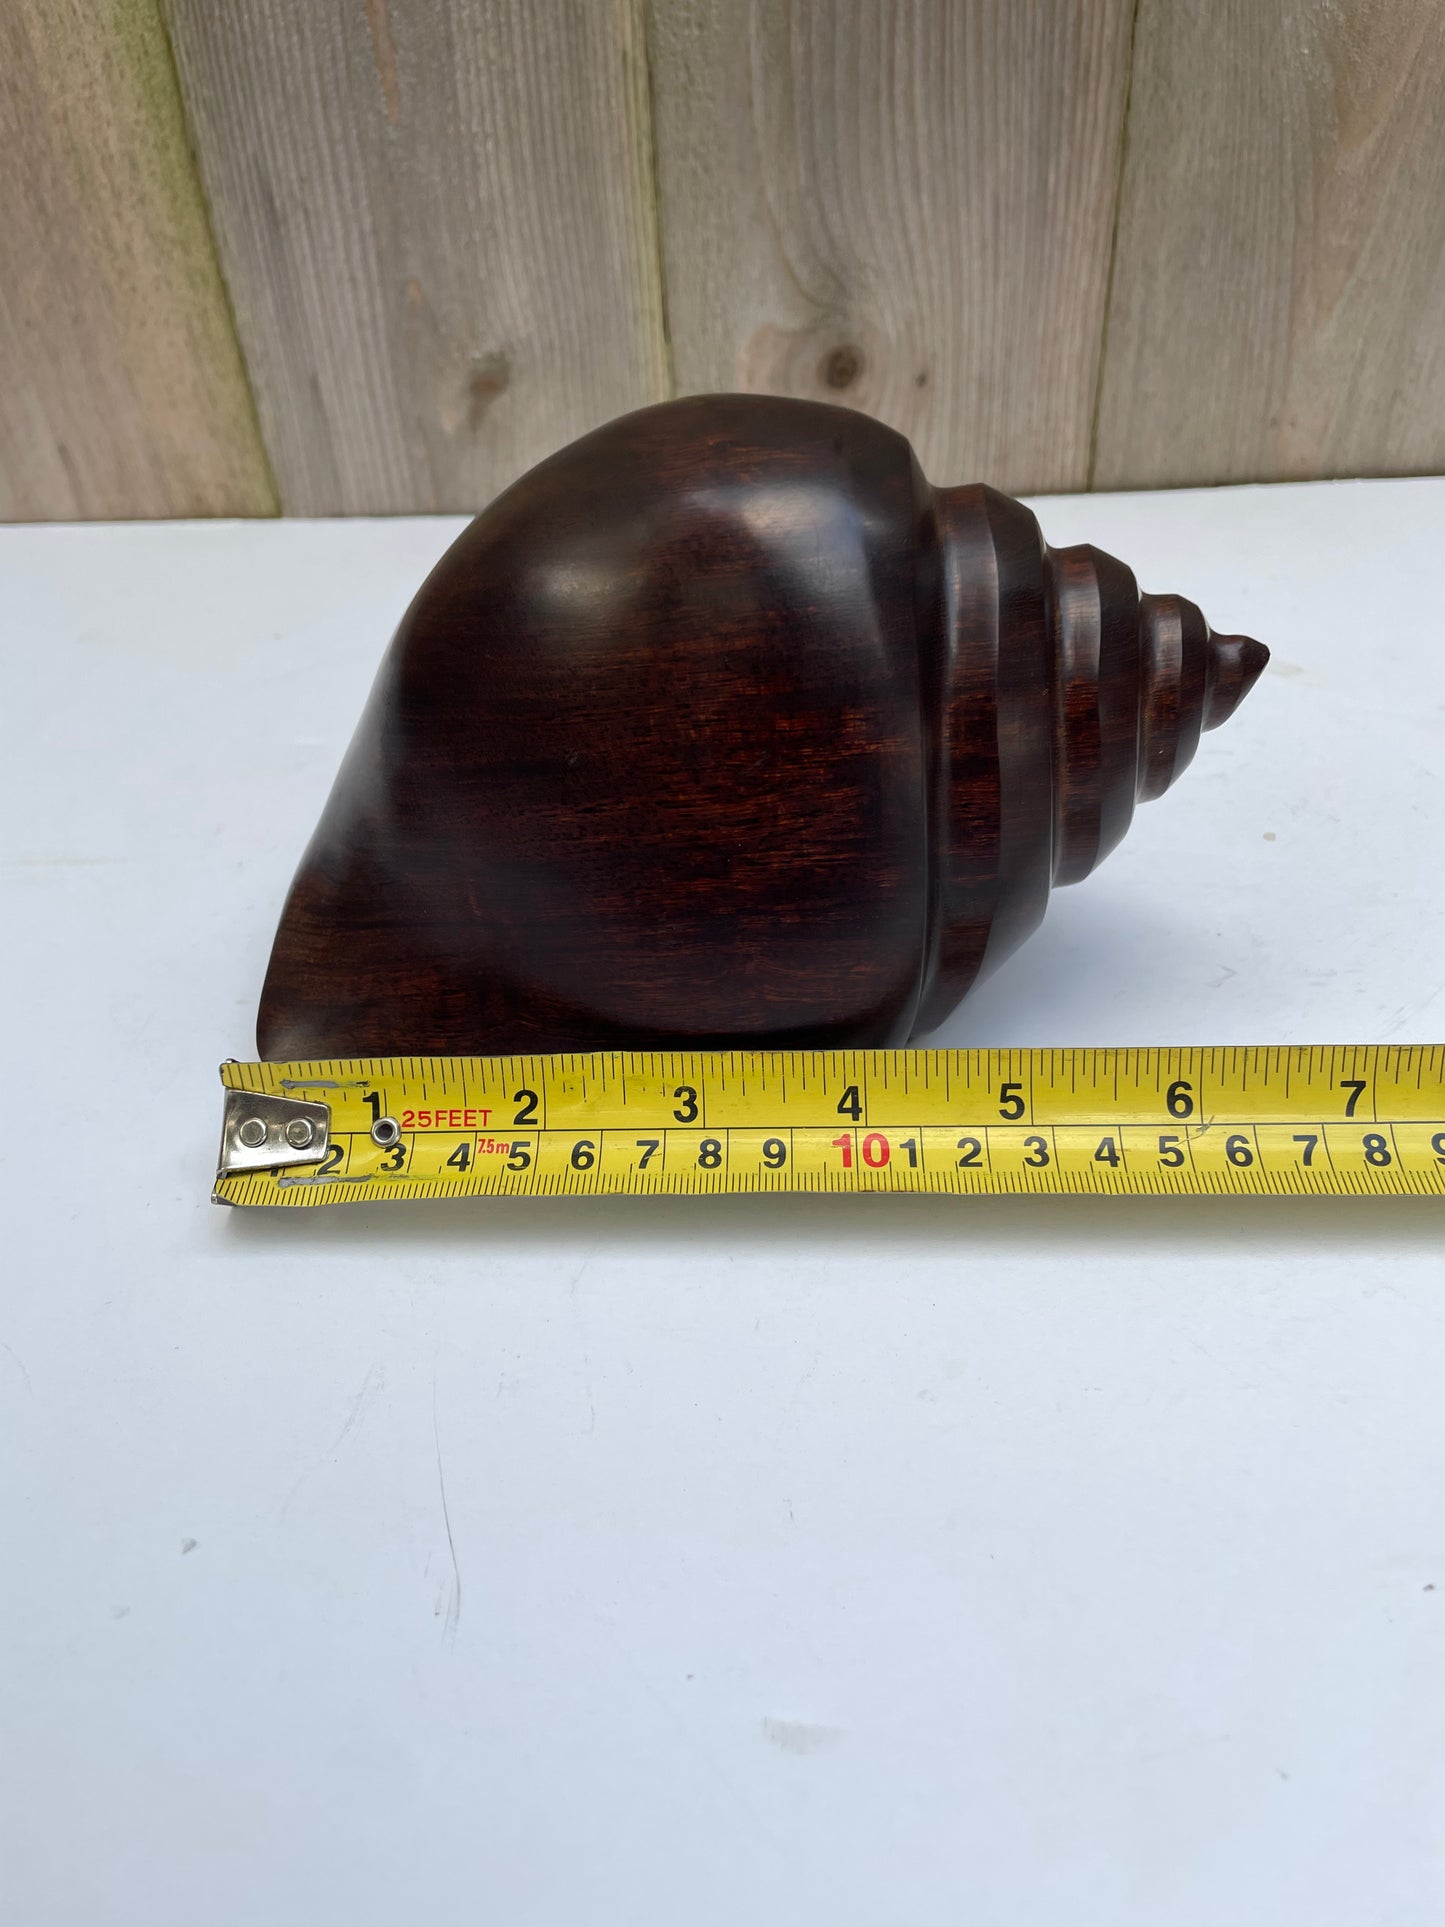 Mid 20th Century Carved & Polished Rosewood Conch Shell